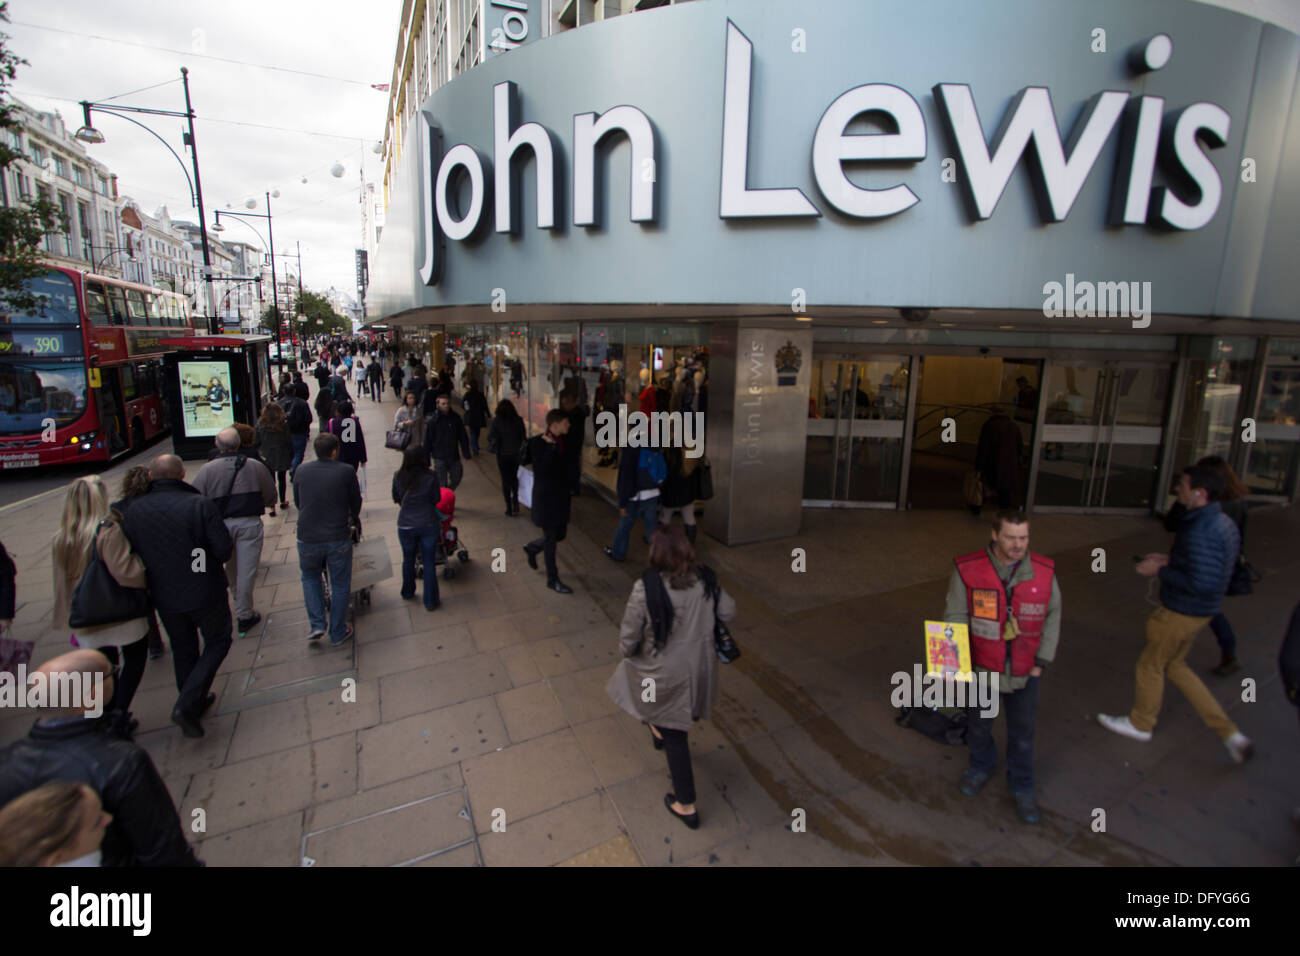 John Lewis Oxford Street London with big issue salesmen in foreground Stock Photo